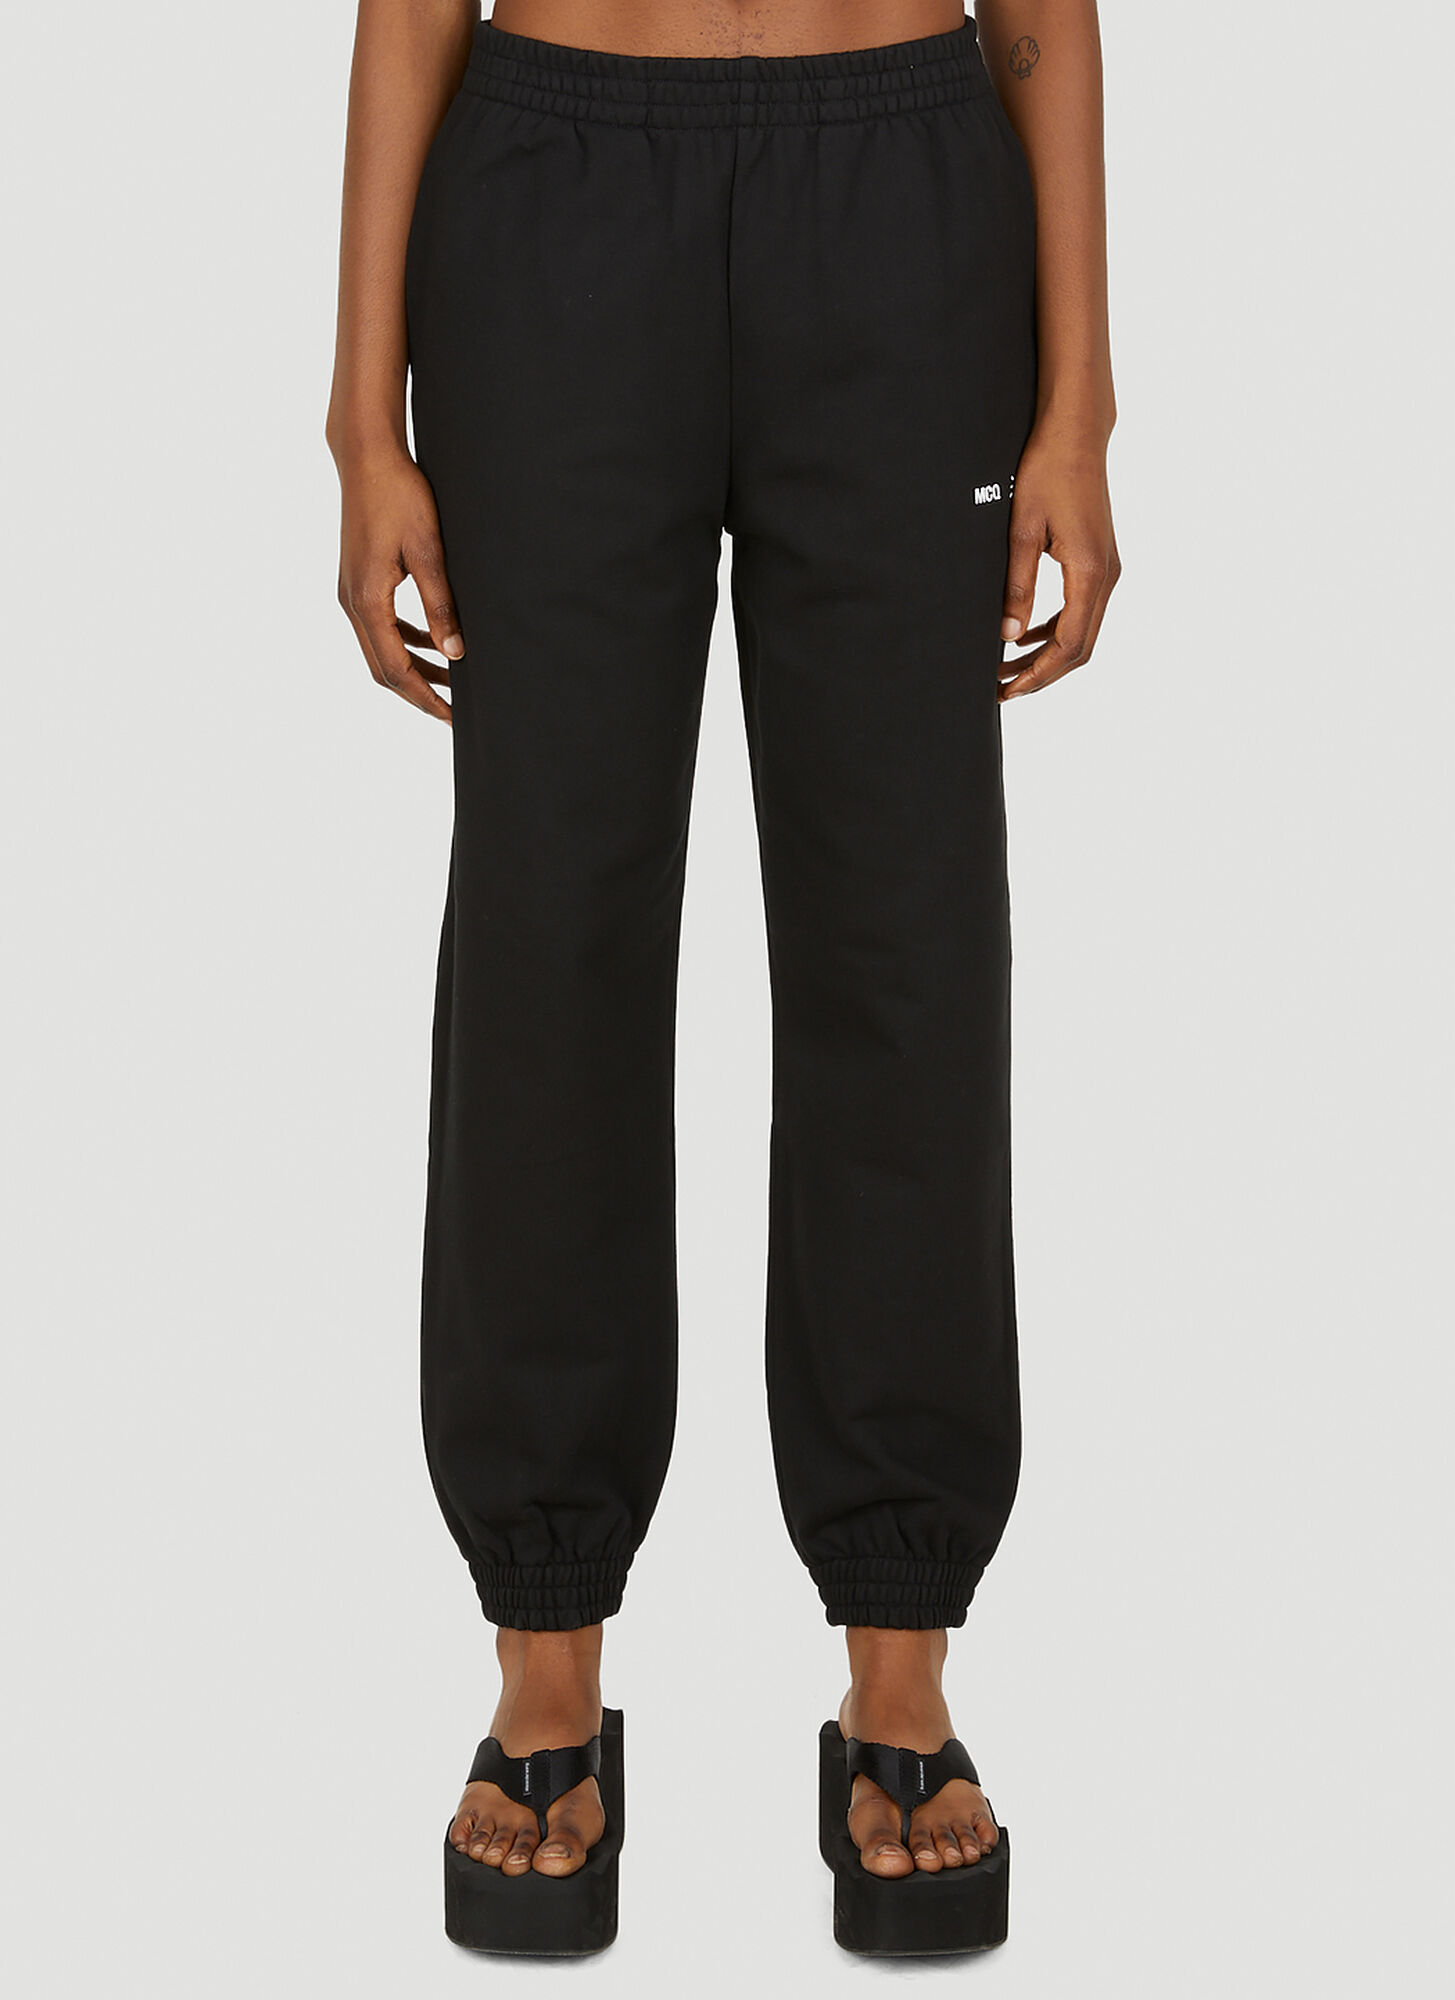 MCQ BY ALEXANDER MCQUEEN ICON LOGO PRINT TRACK PANTS